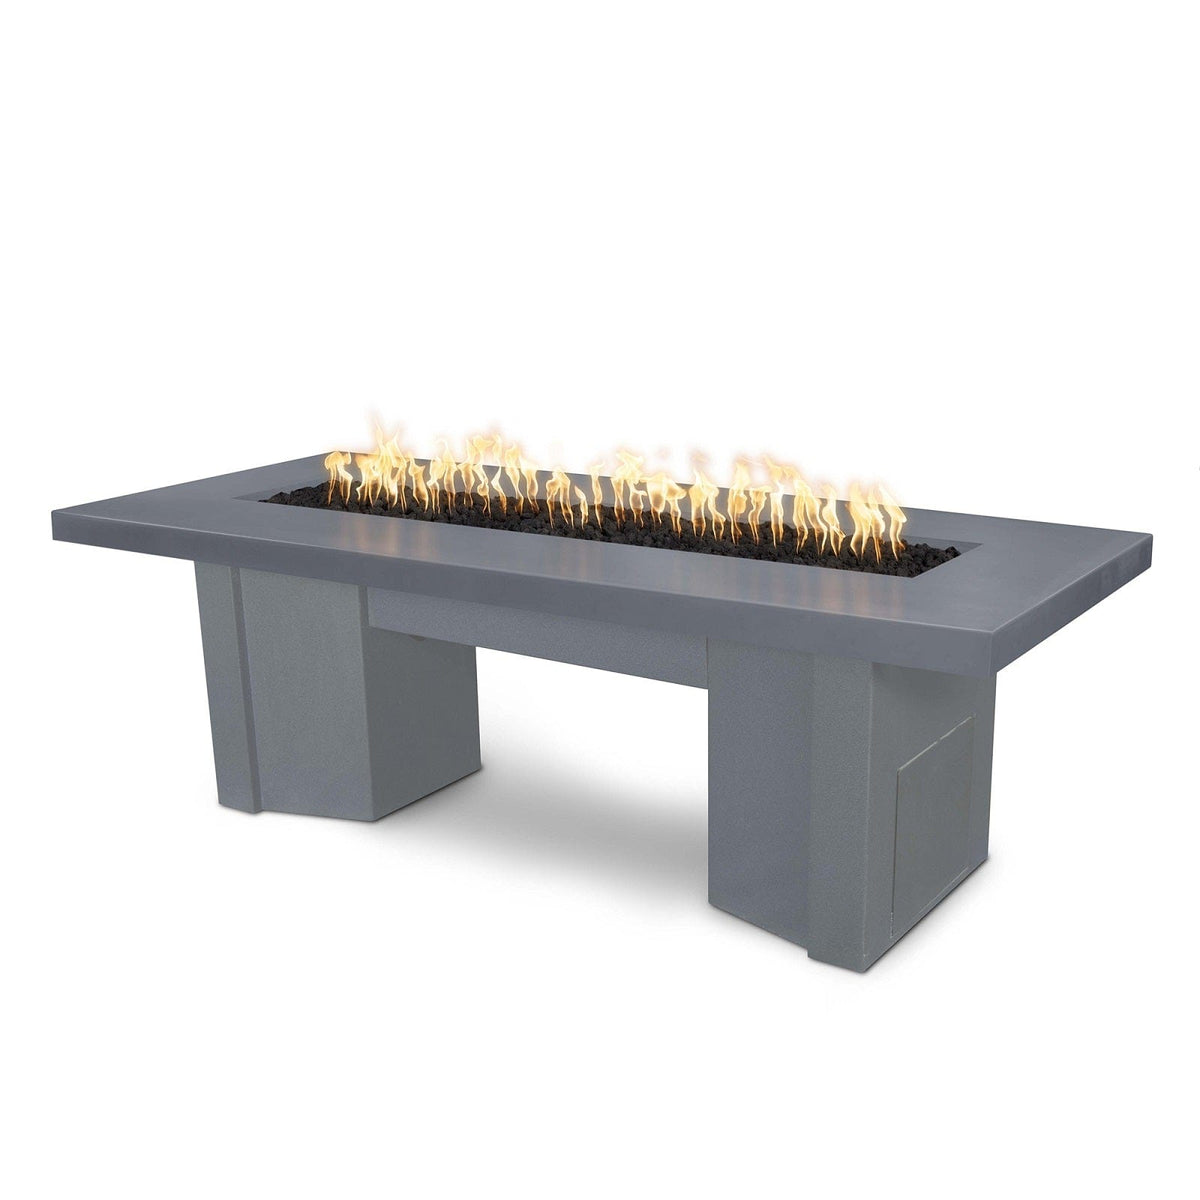 The Outdoor Plus Fire Features Gray (-GRY) / Gray Powder Coated Steel (-GRY) The Outdoor Plus 78&quot; Alameda Fire Table Smooth Concrete in Liquid Propane - 110V Plug &amp; Play Electronic Ignition / OPT-ALMGFRC78EKIT-LP